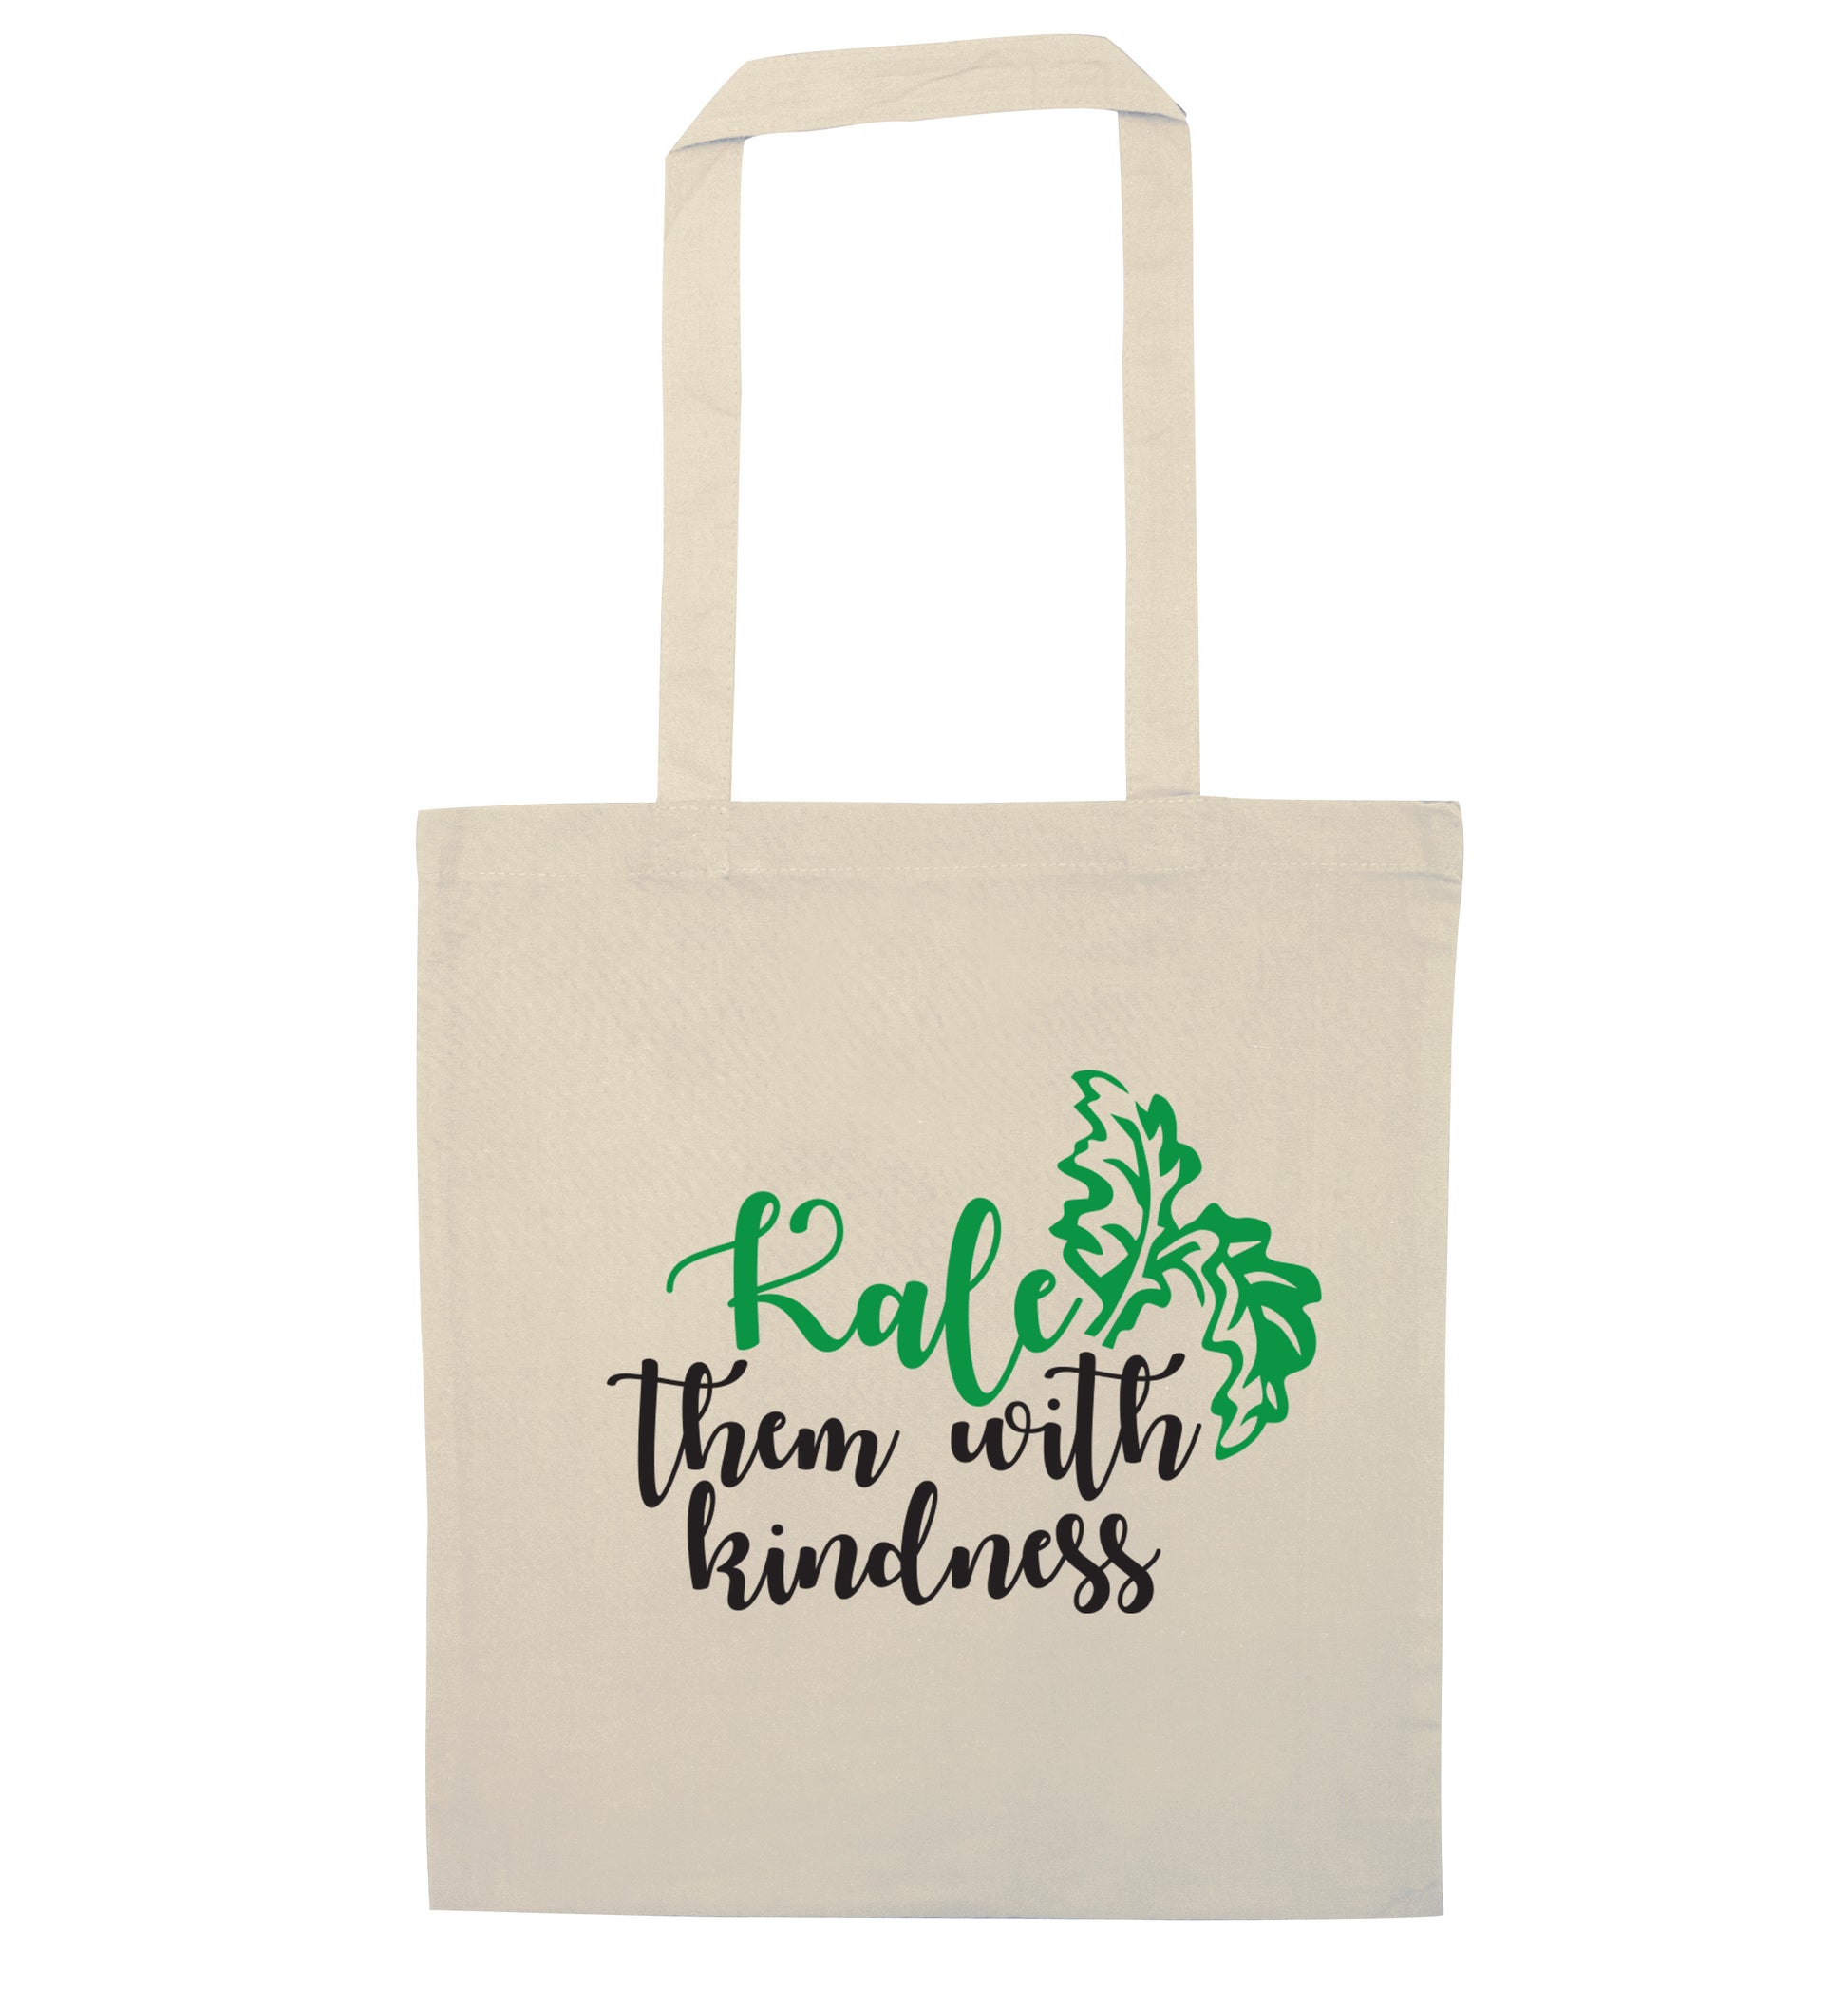 Kale them with kindness natural tote bag